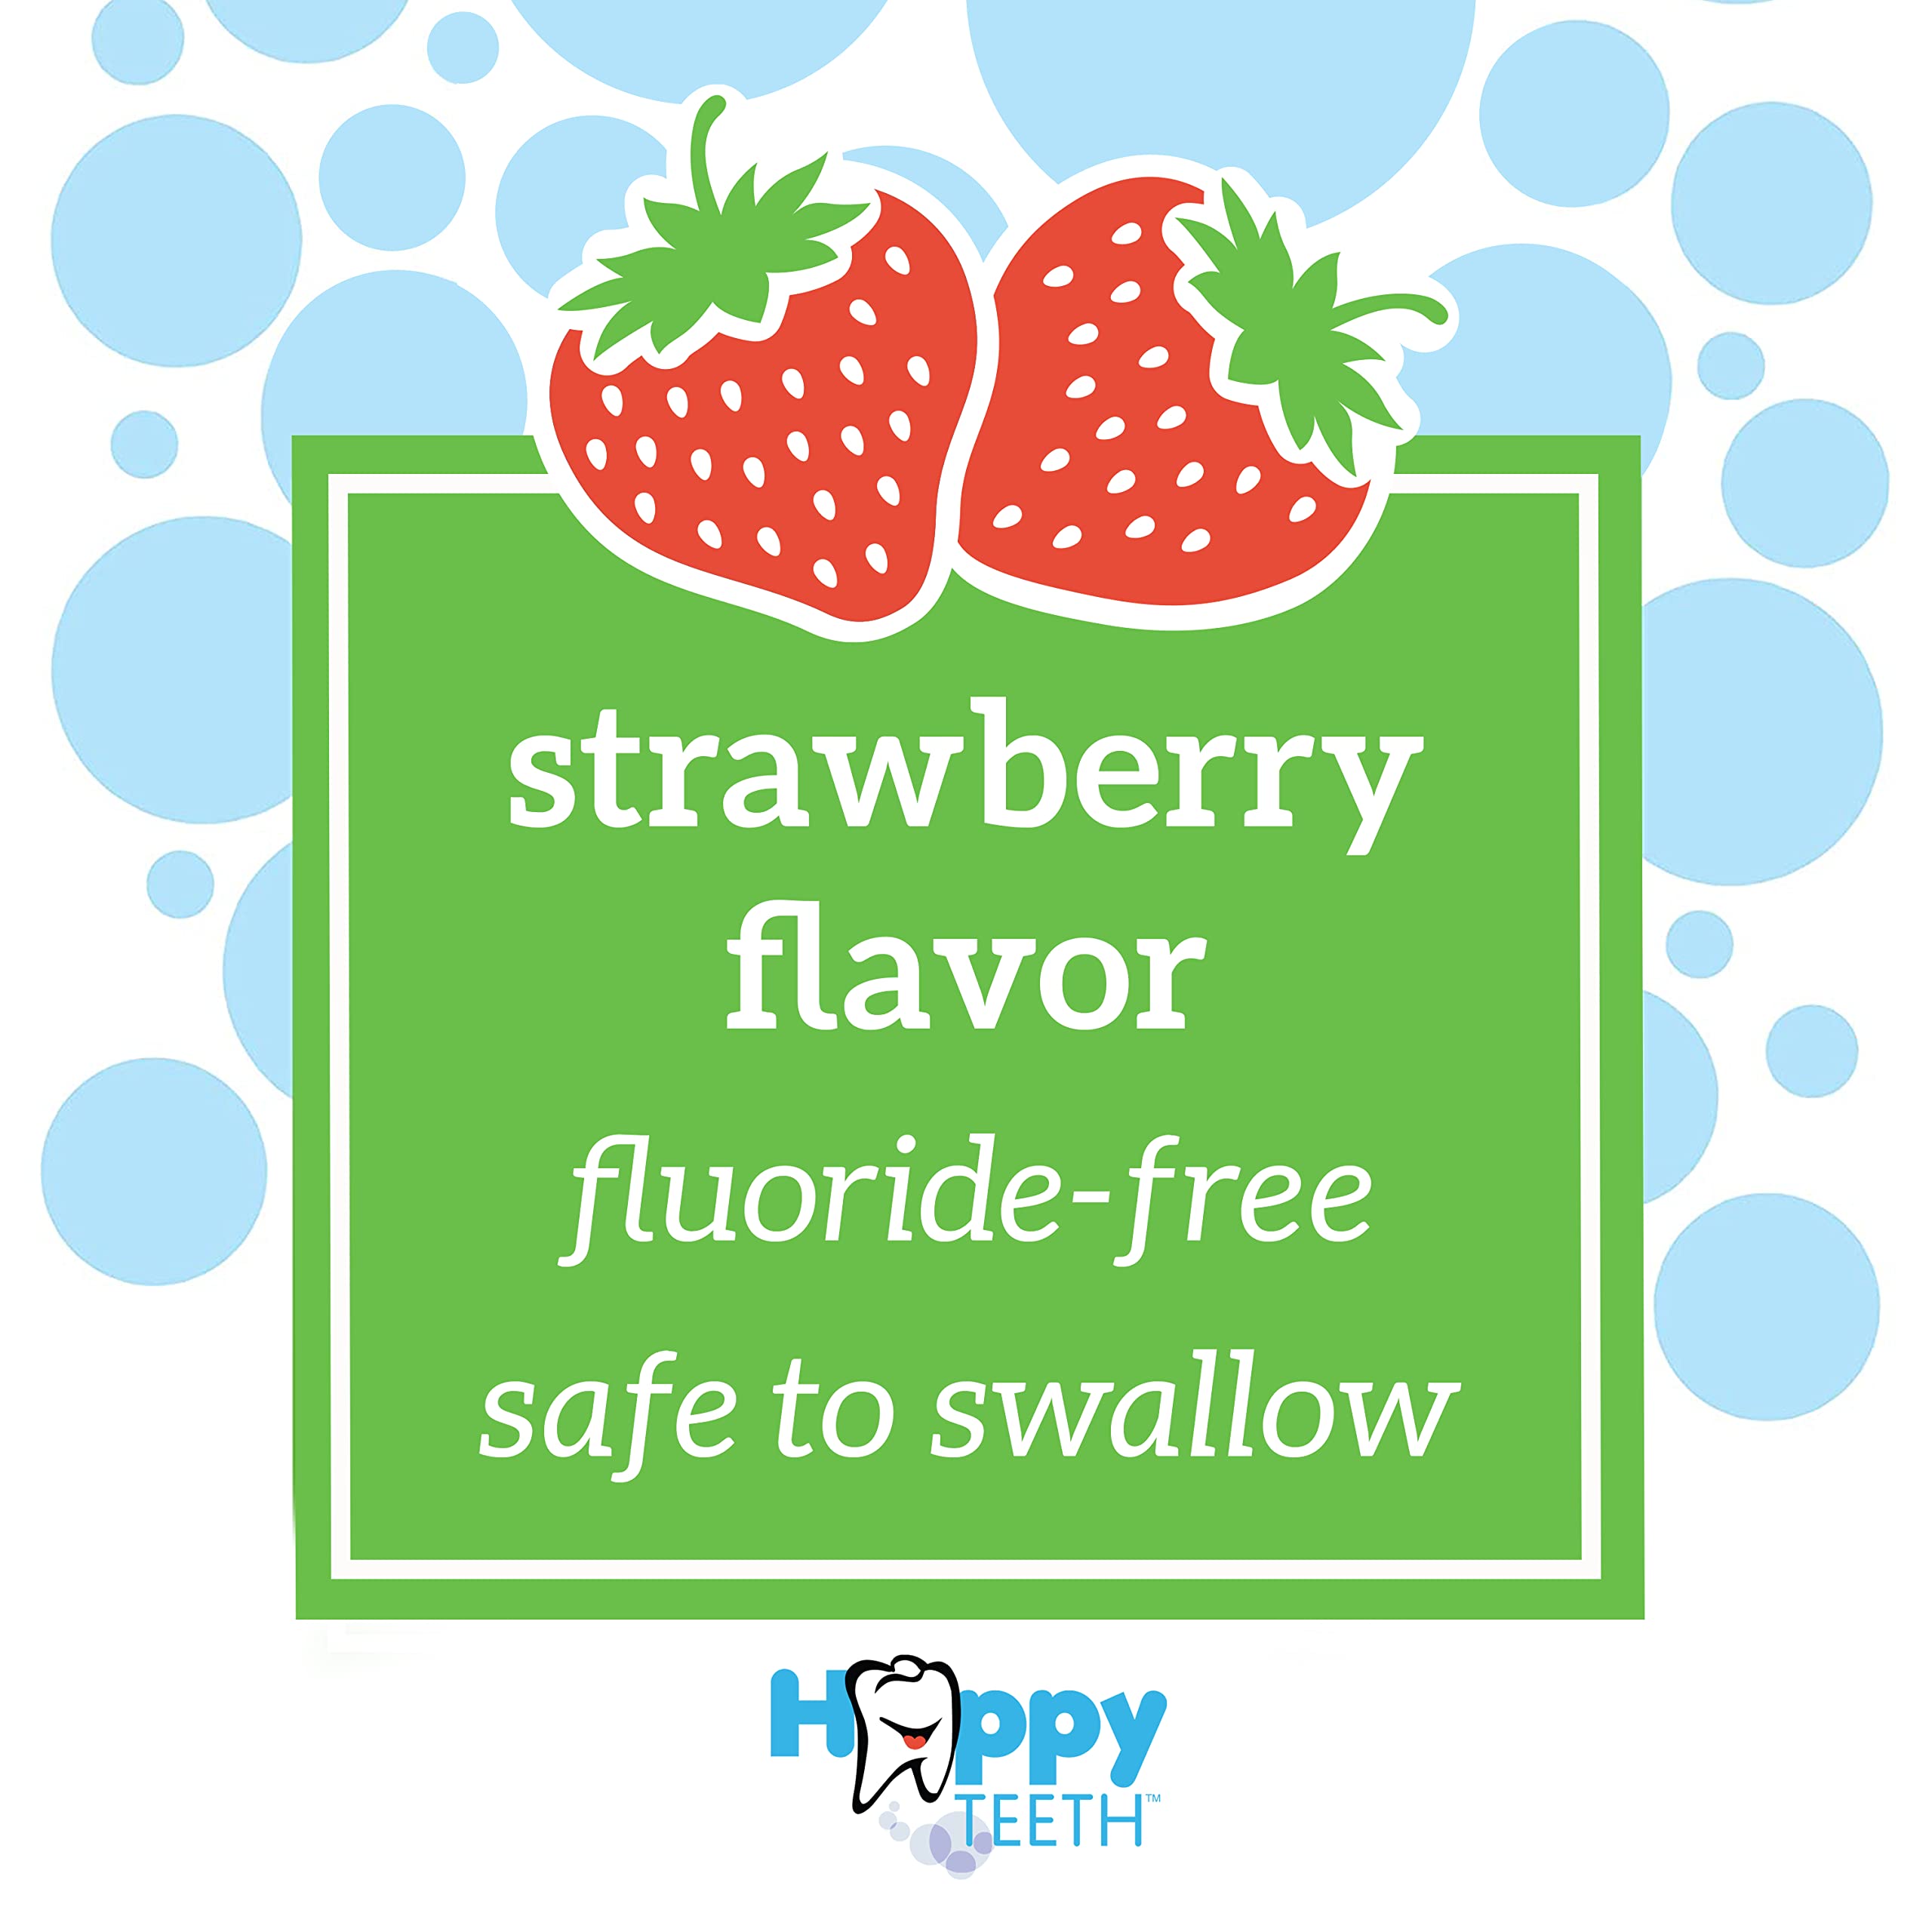 Dr. Brown’s Fluoride-Free Baby Toothpaste, Safe to Swallow, Strawberry, 1-Pack, 1.4oz/40g, 0-3 years